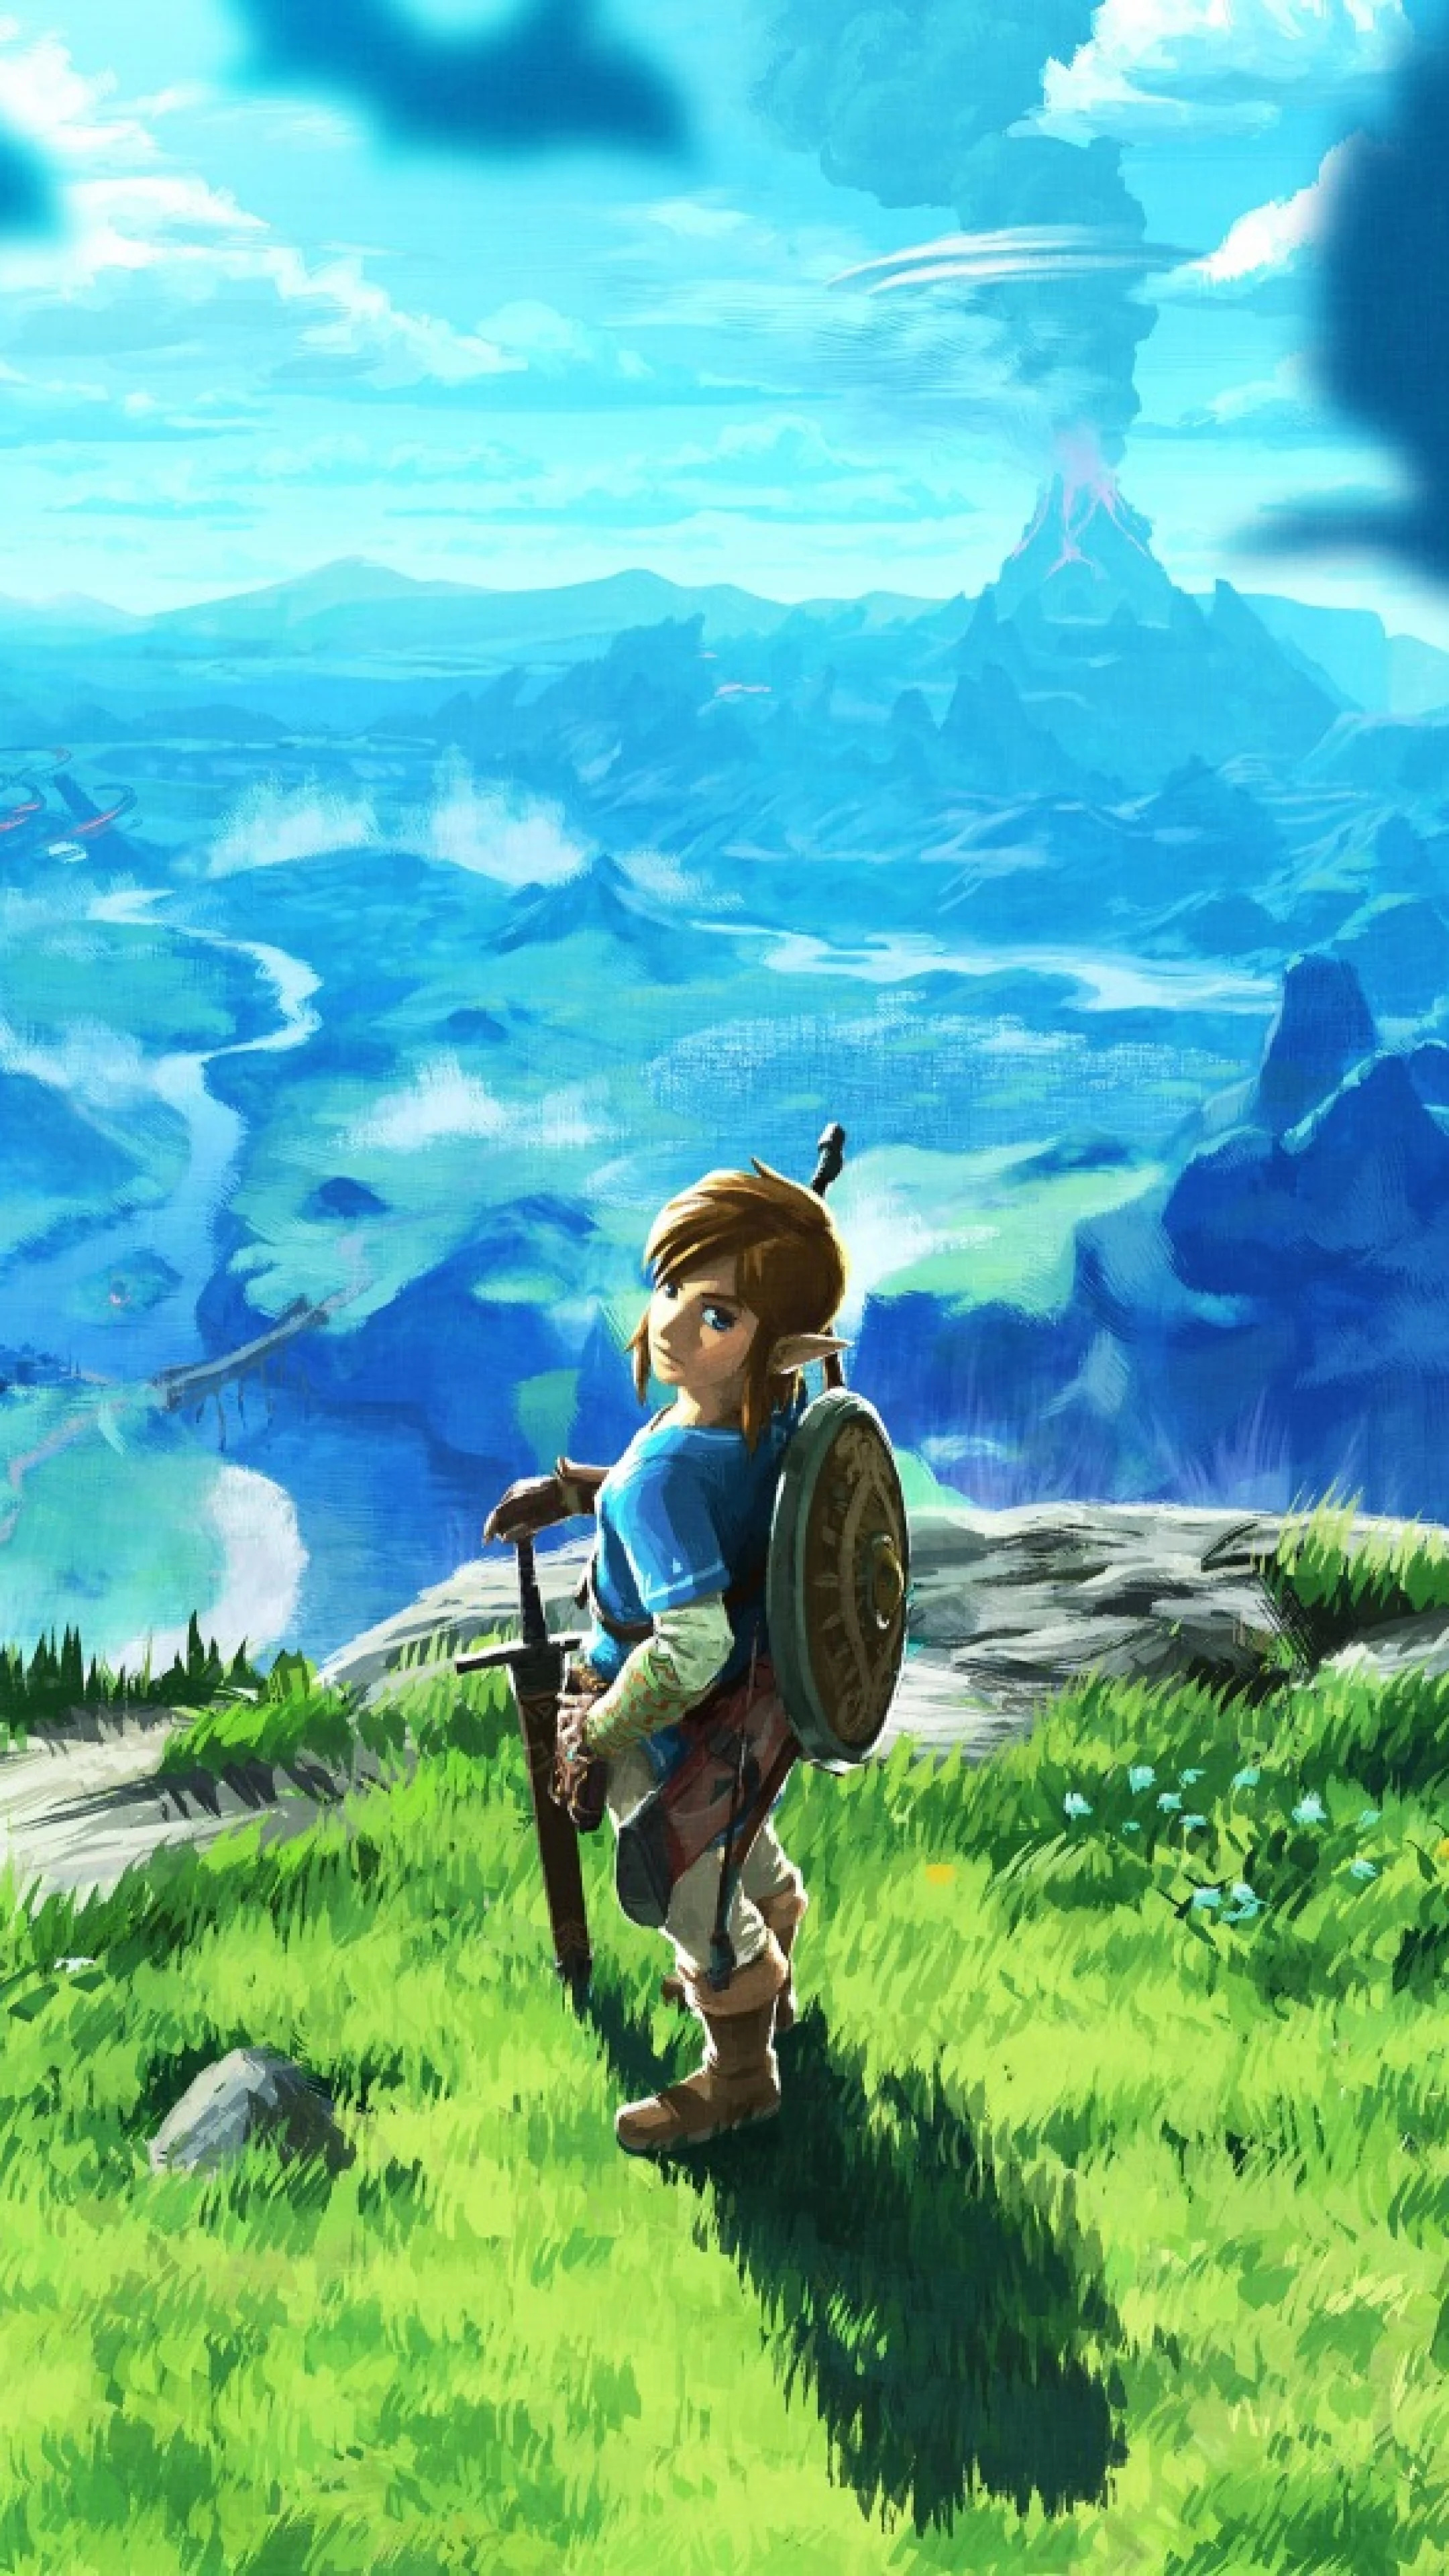 Breath of the Wild, Captivating wallpapers, Link's legend, Gaming masterpiece, 2160x3840 4K Phone